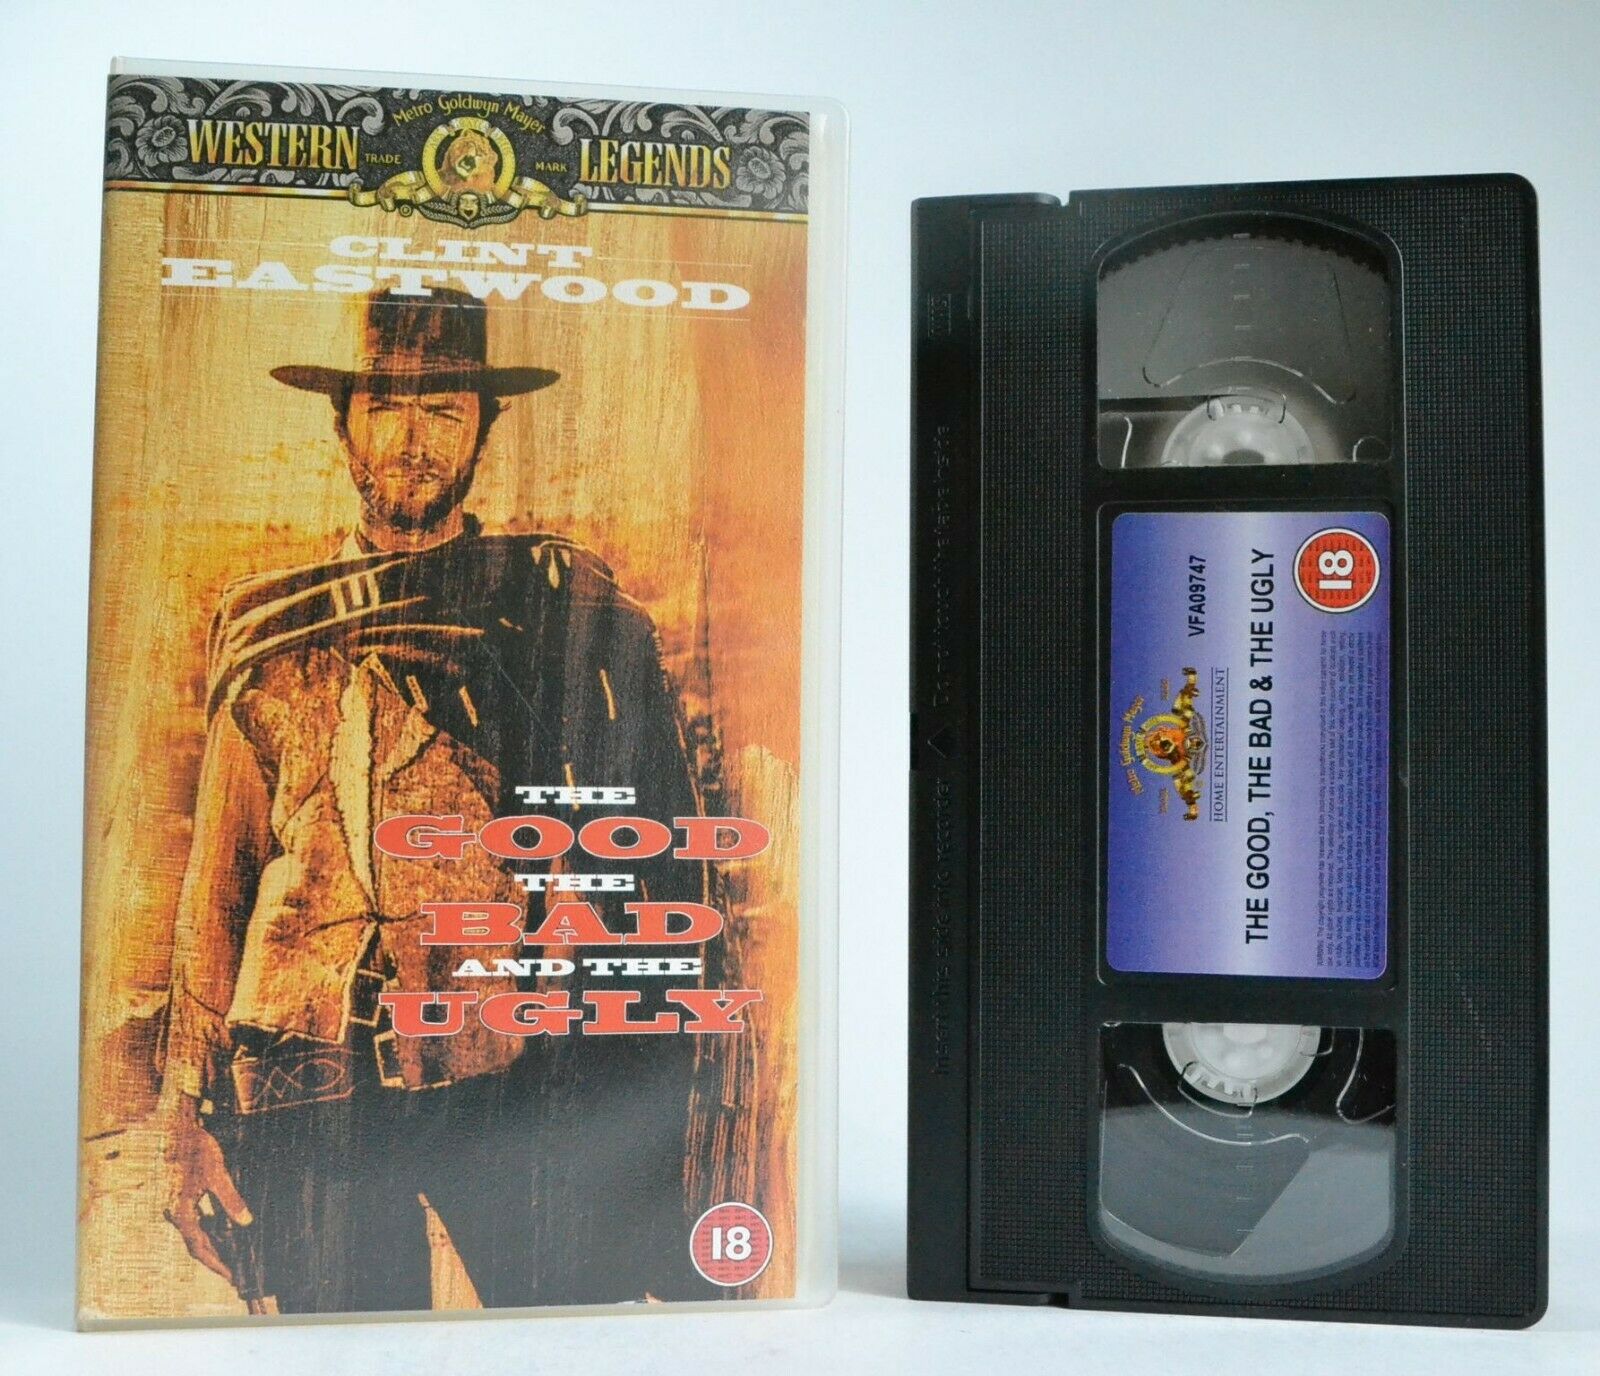 The Good, The Bad And The Ugly: Italian Spaghetti Western - C.Eastwood - Pal VHS-